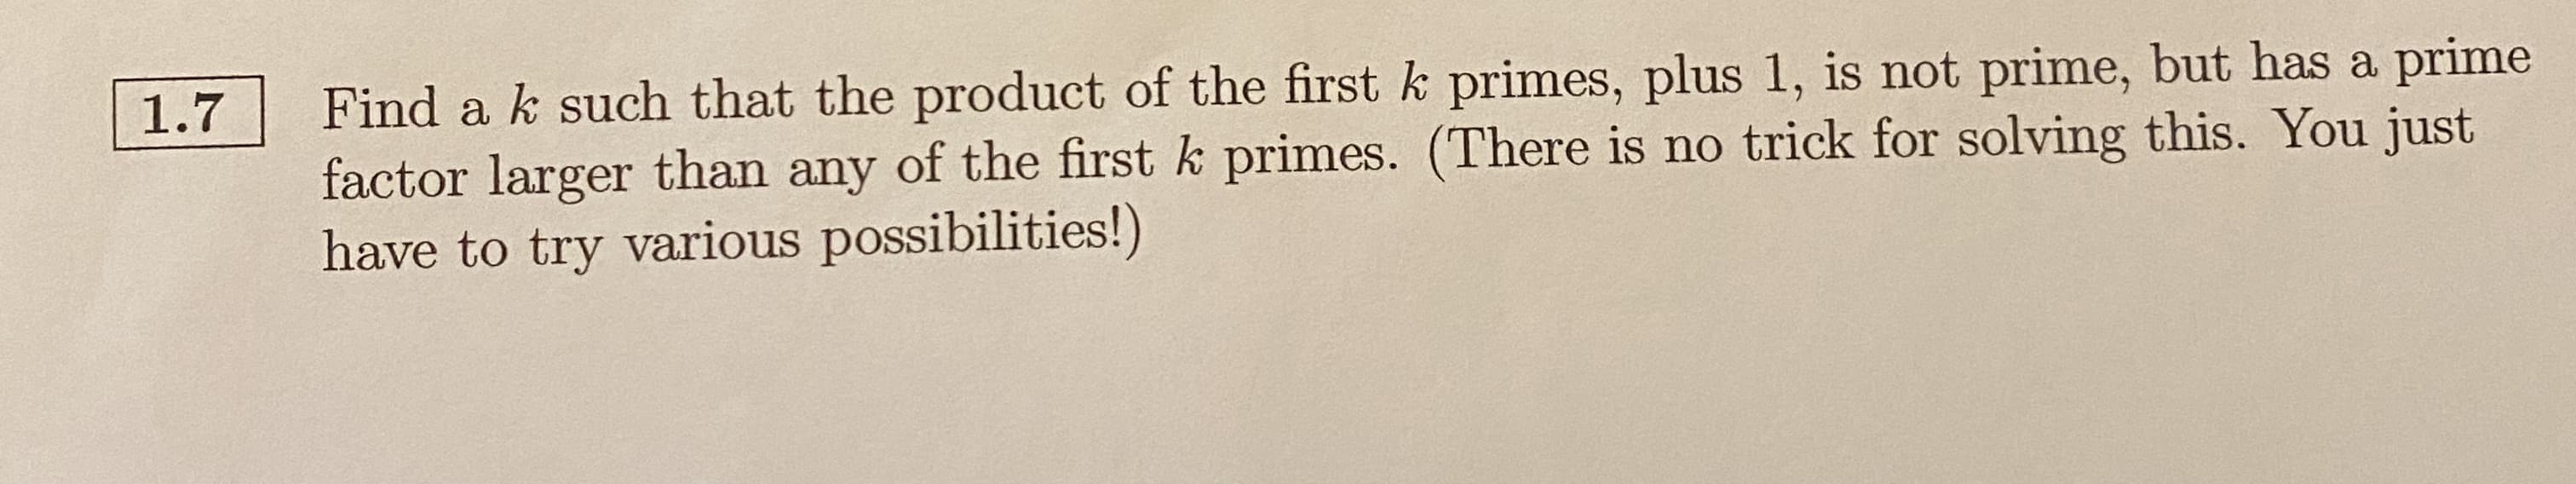 Find a k such that the product of the first k primes, plus 1, is not prime, but has a prime
factor larger than any of the first k primes. (There is no trick for solving this. You just
have to try various possibilities!)
1.7
